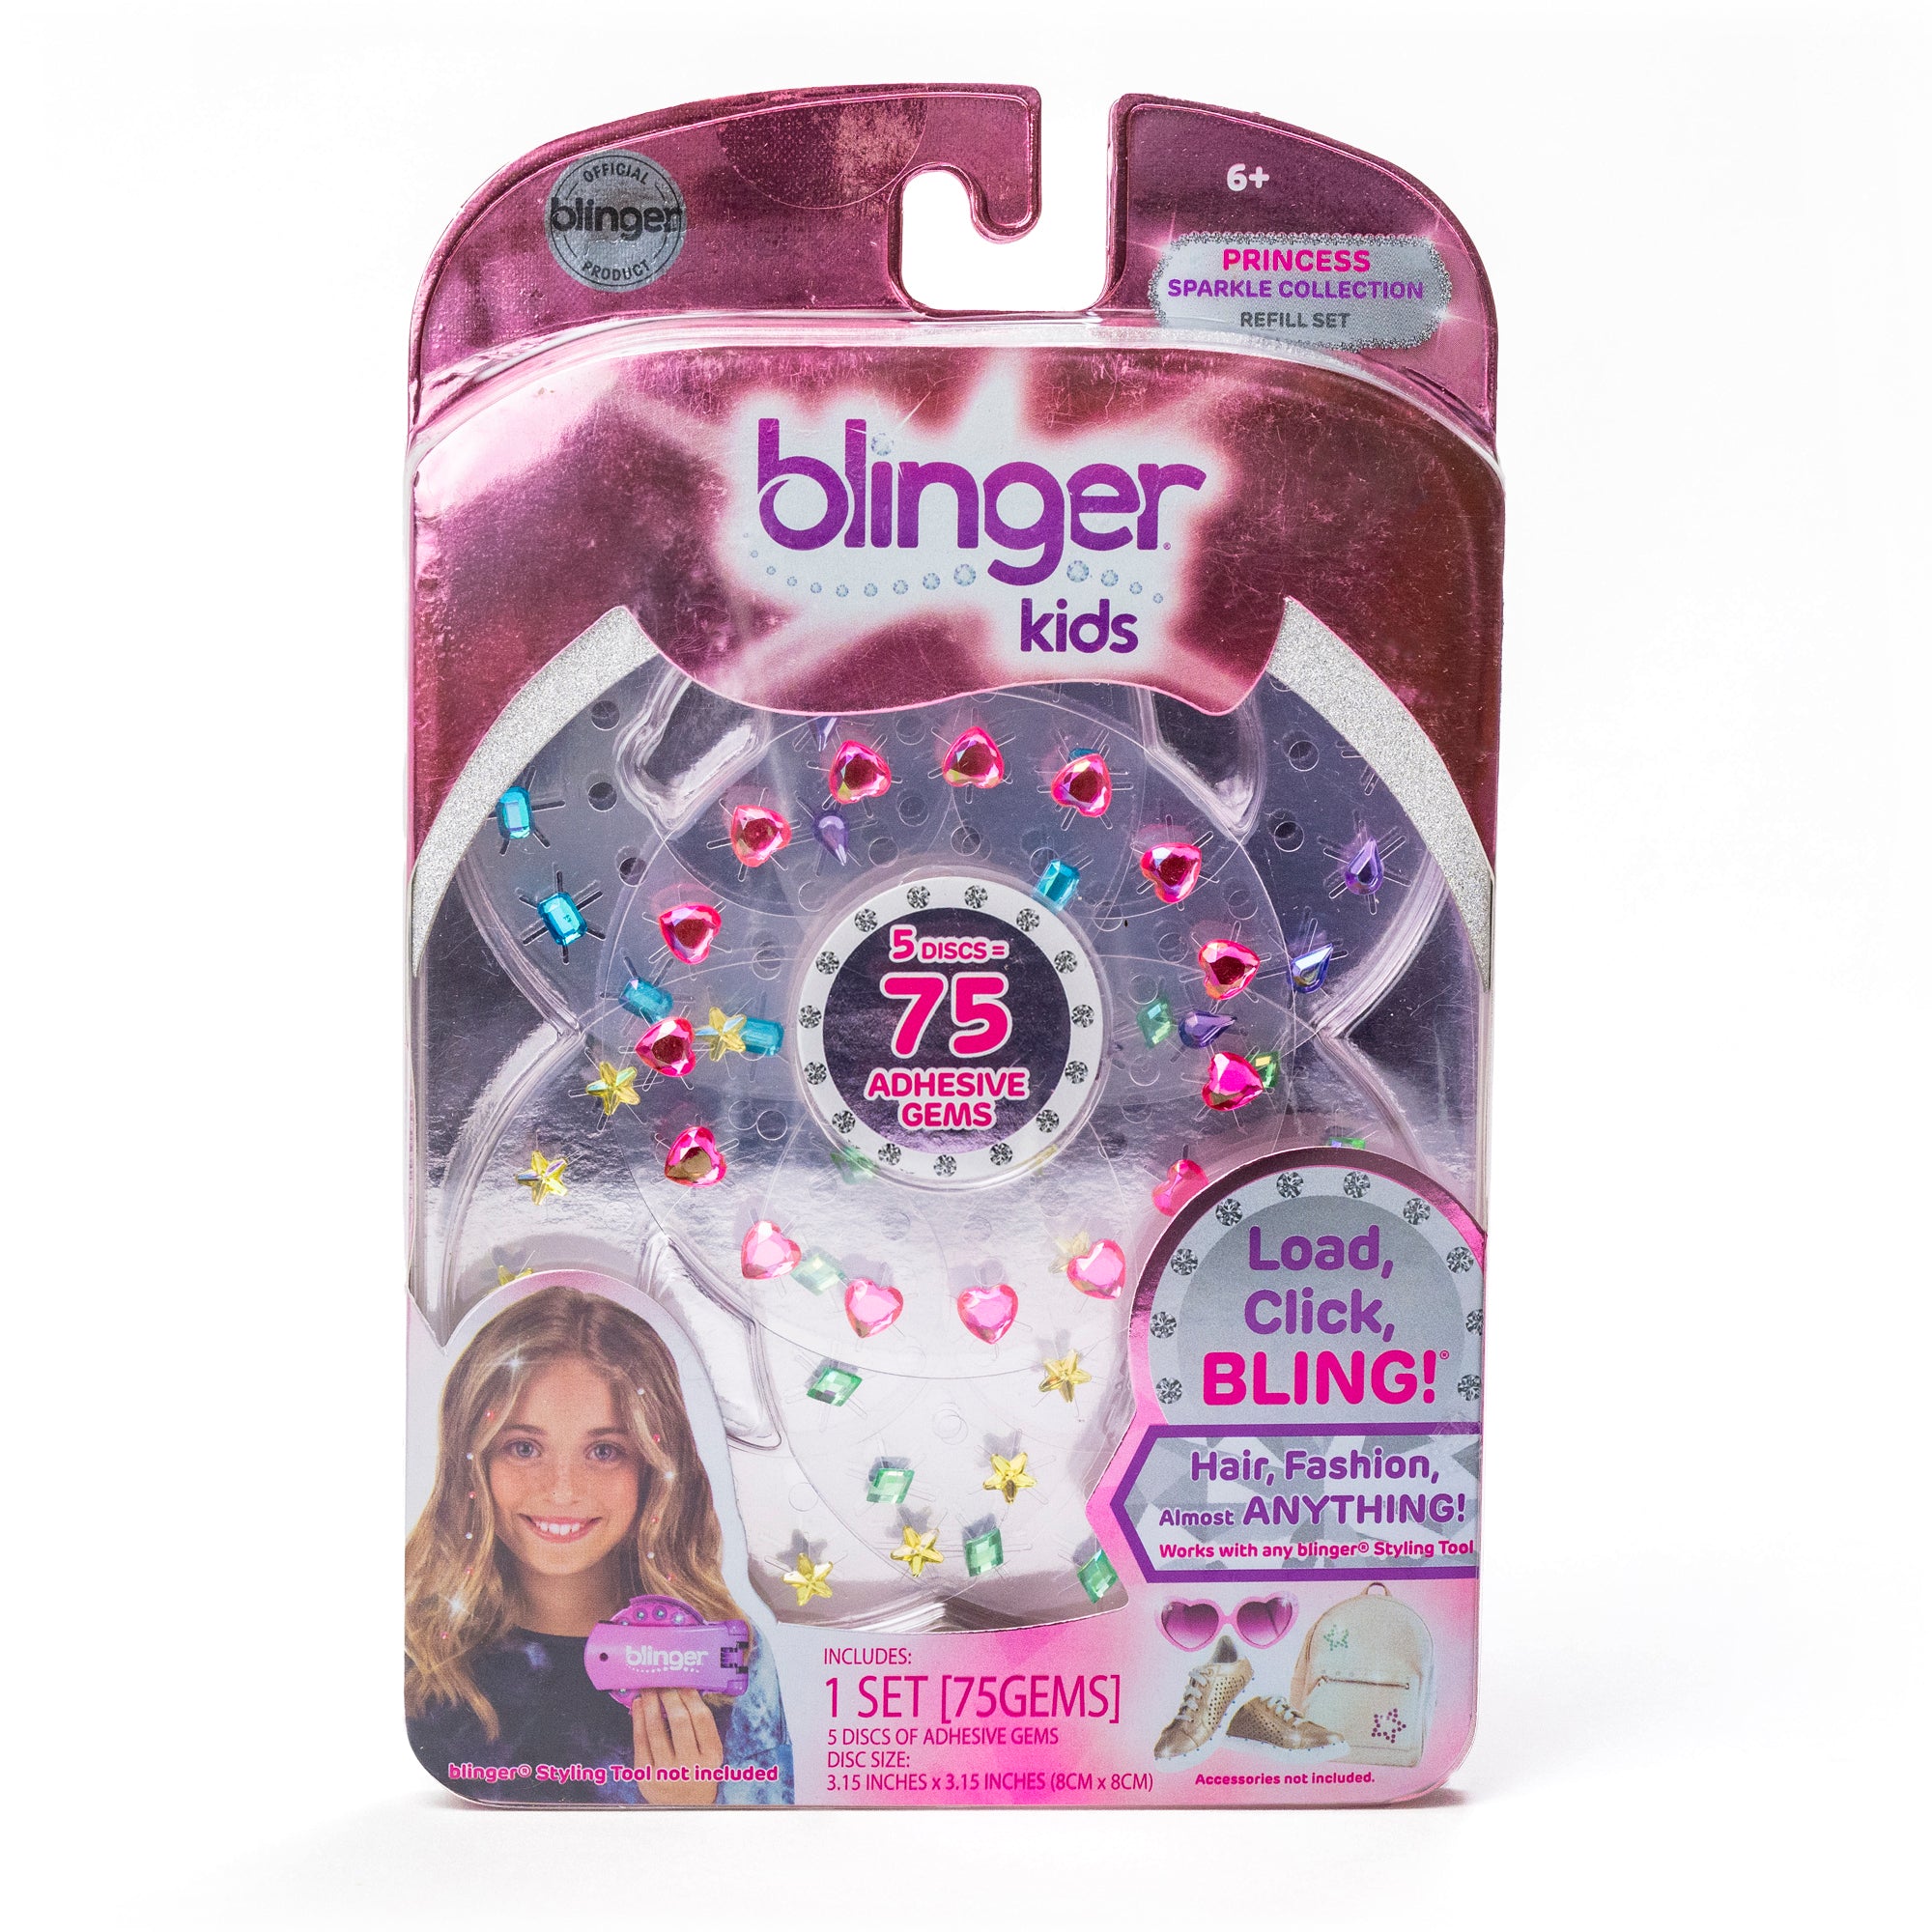 blinger® Sparkle Collection Refill Pack with 75 Colorful Acrylic Gems